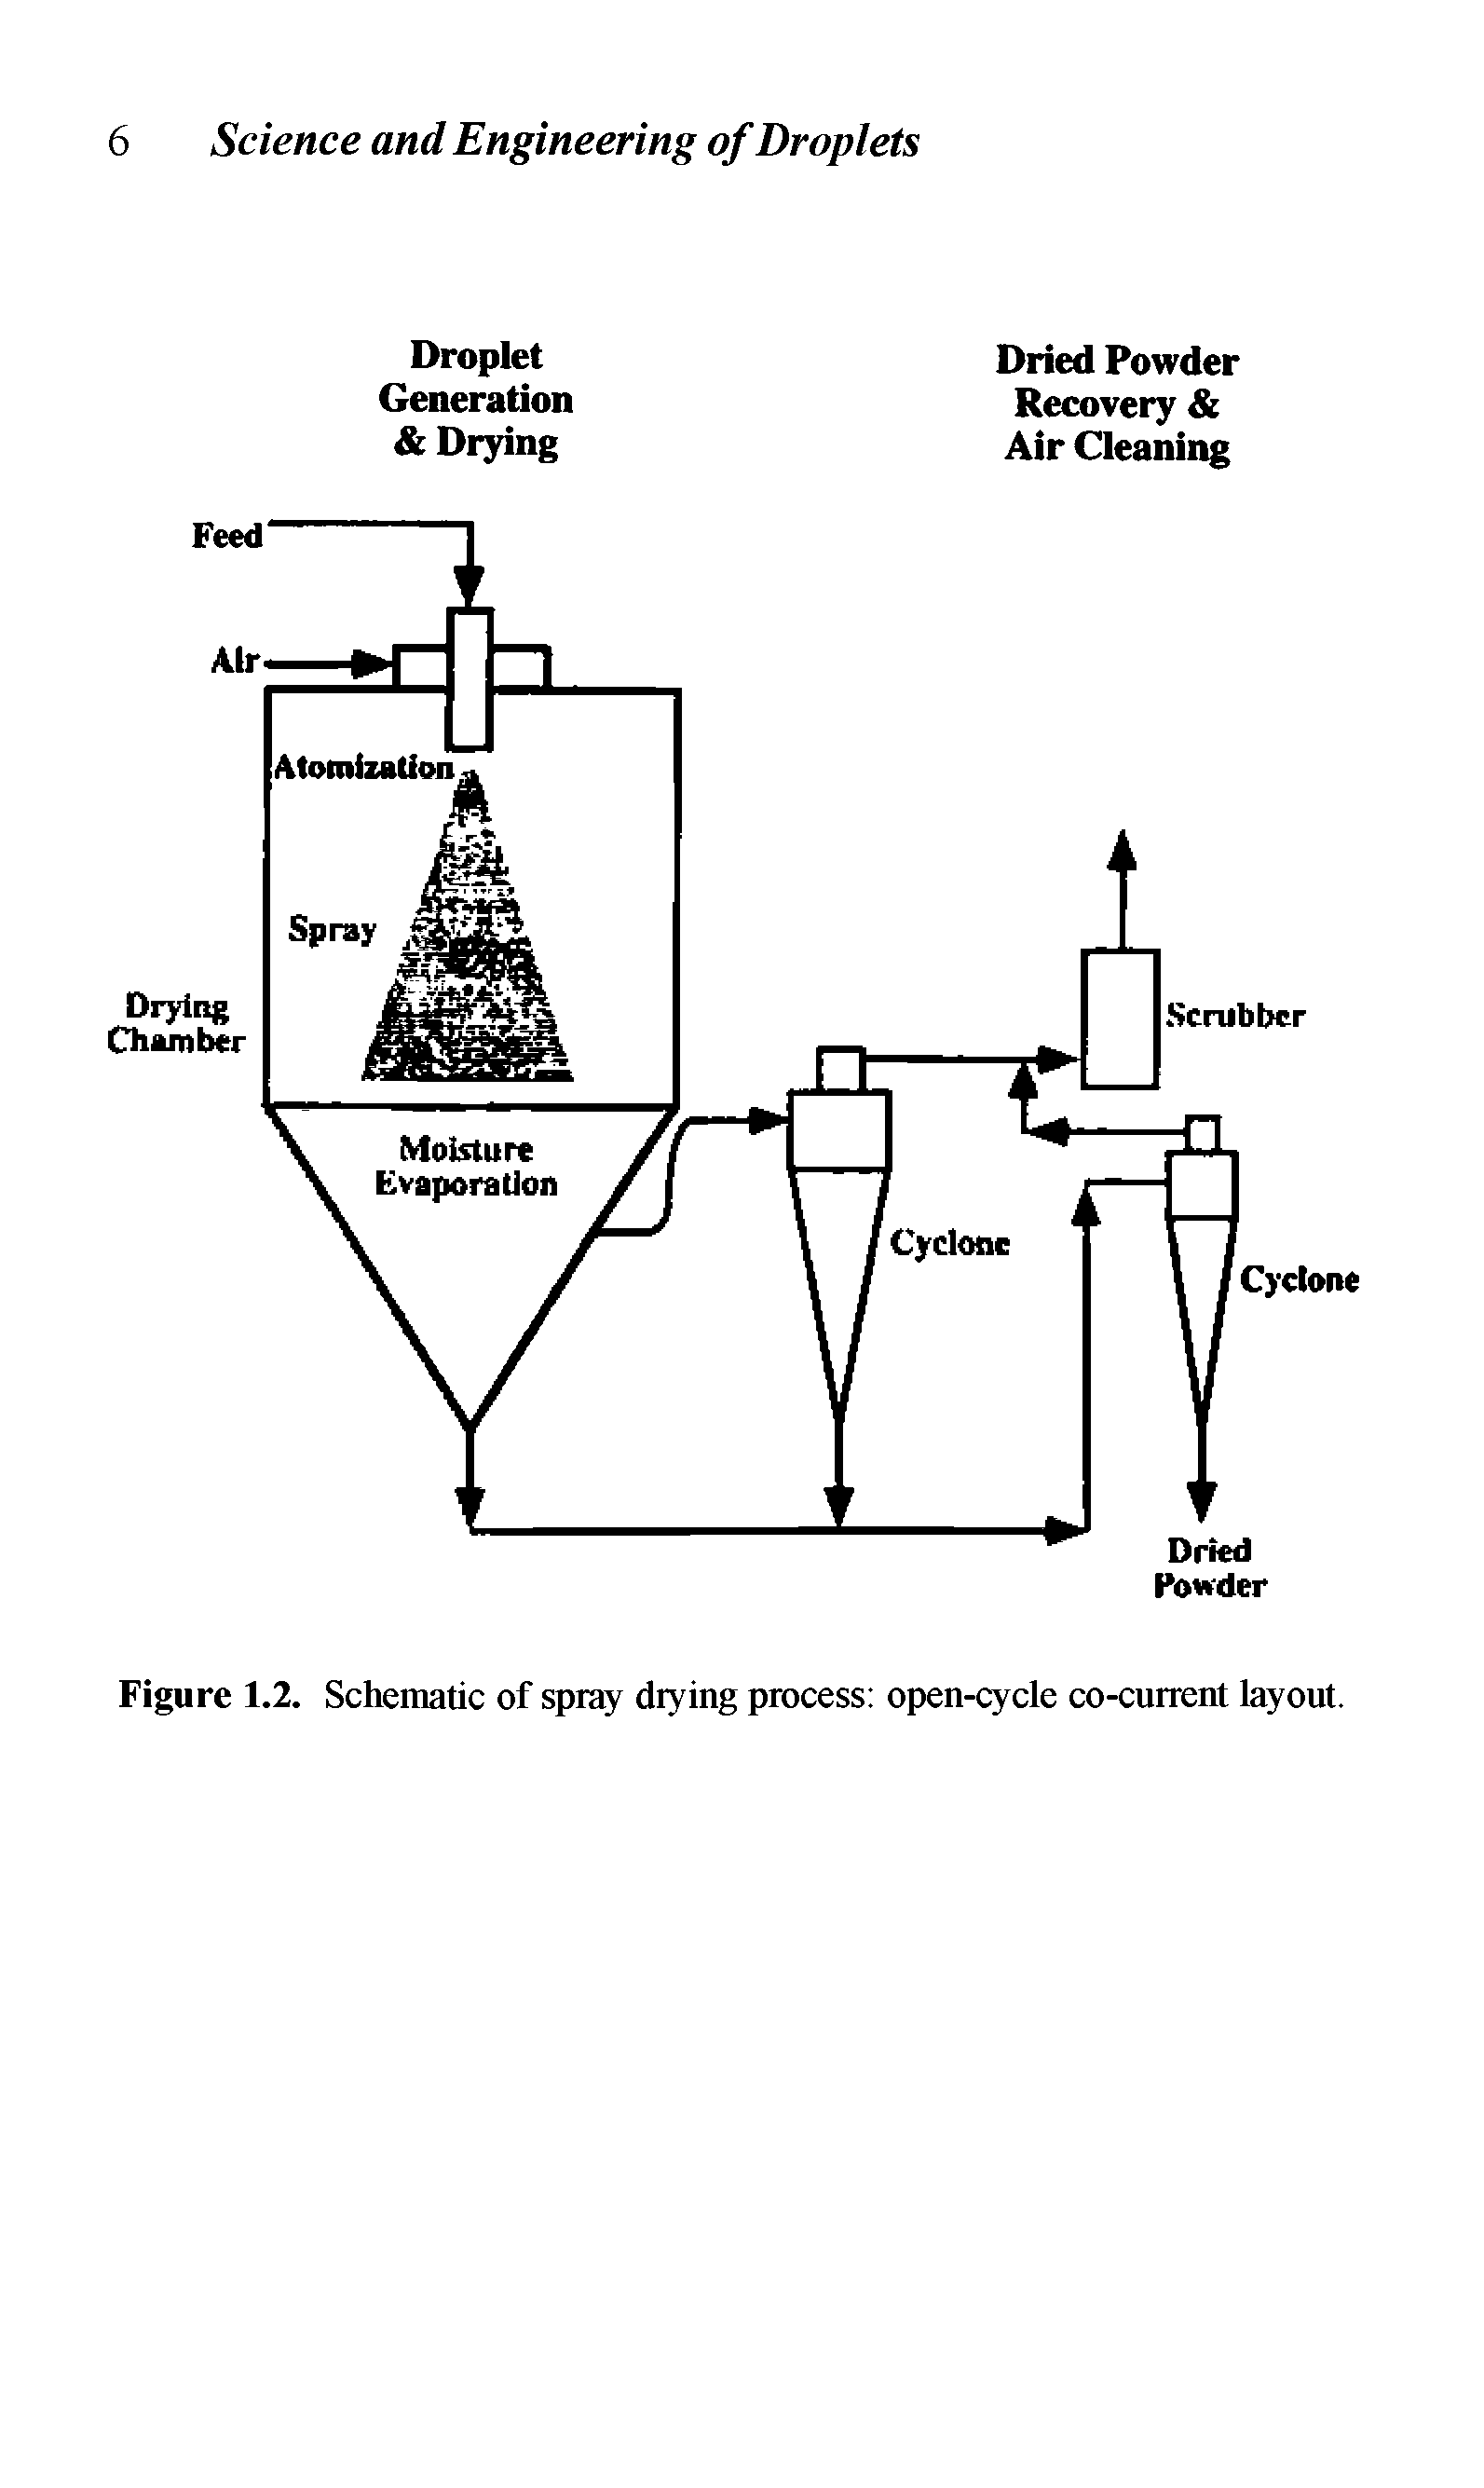 Figure 1.2. Schematic of spray drying process open-cycle co-current layout.